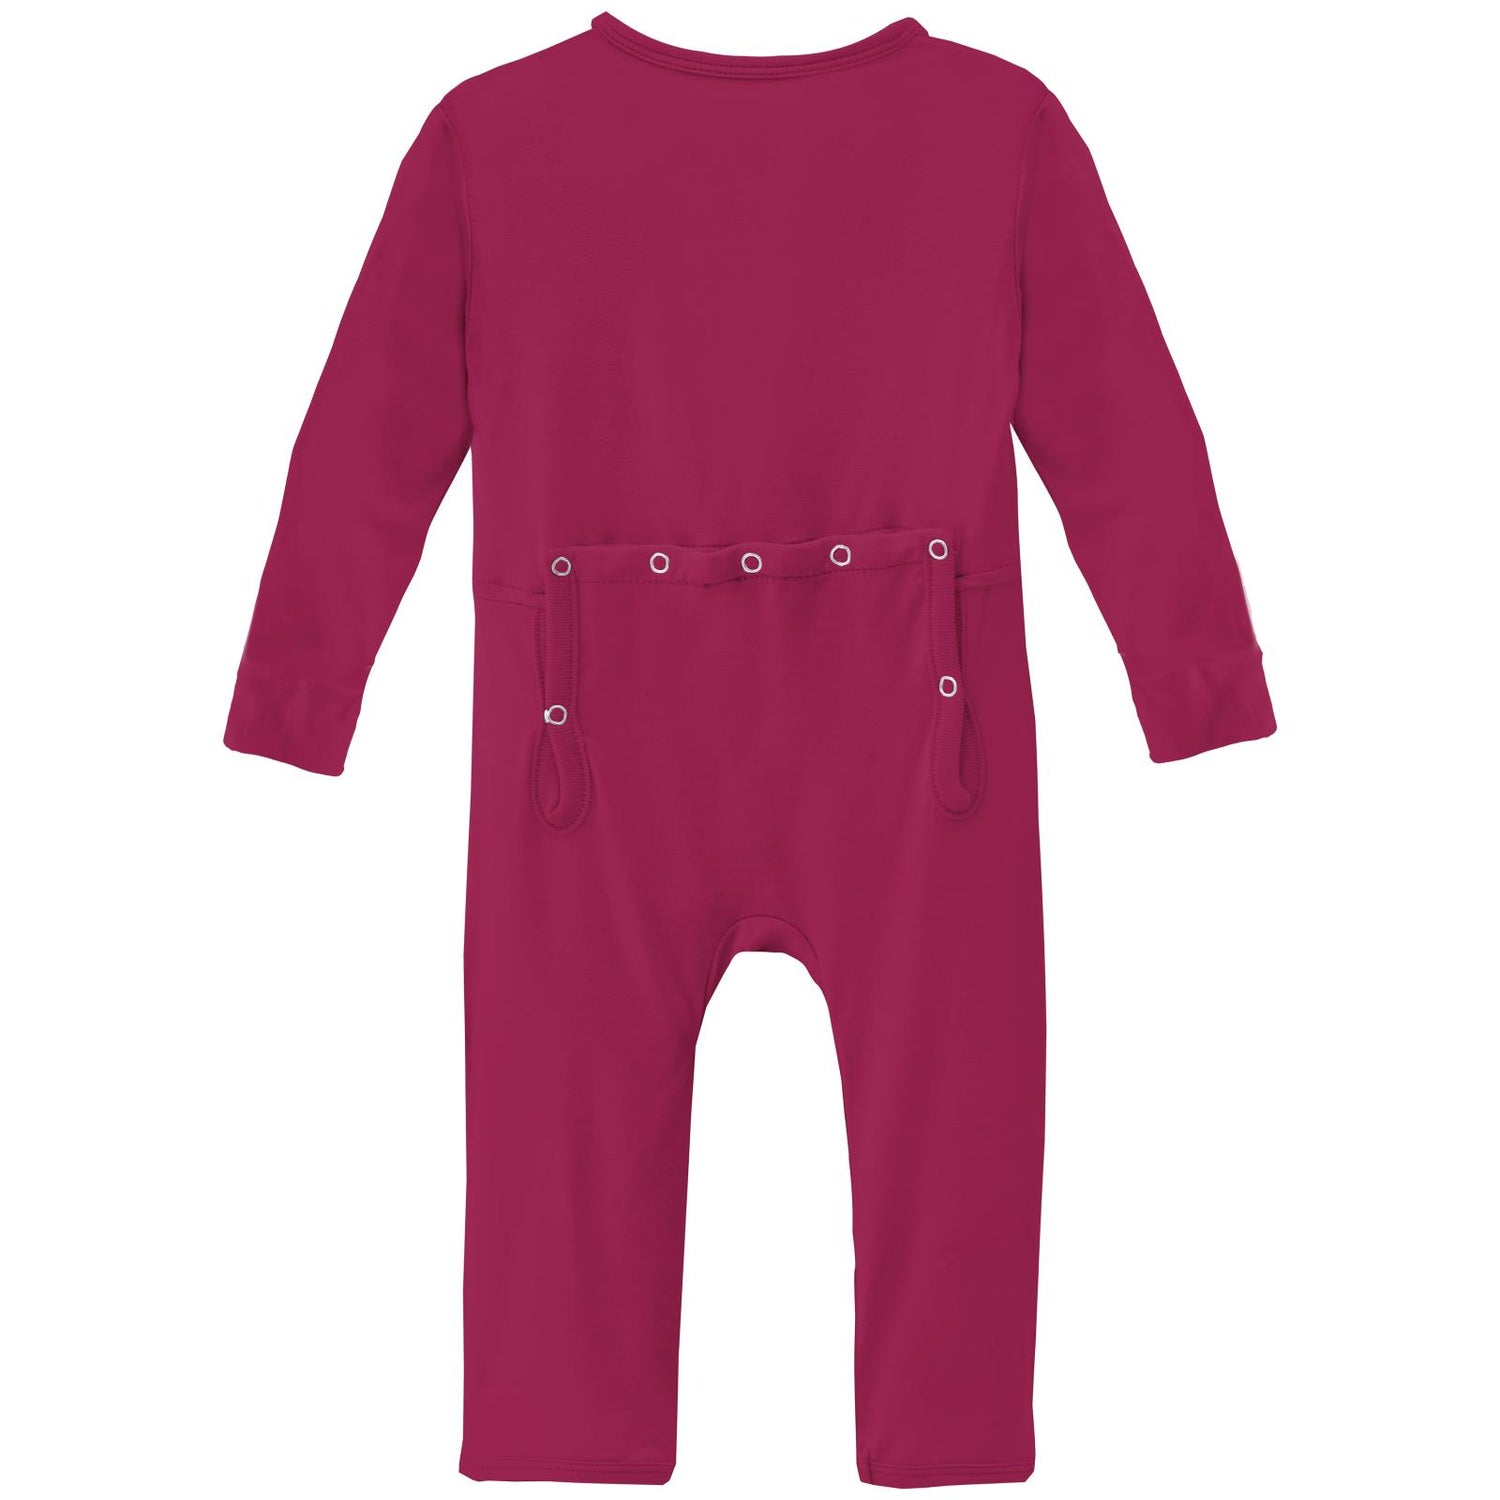 Coverall with Zipper in Berry